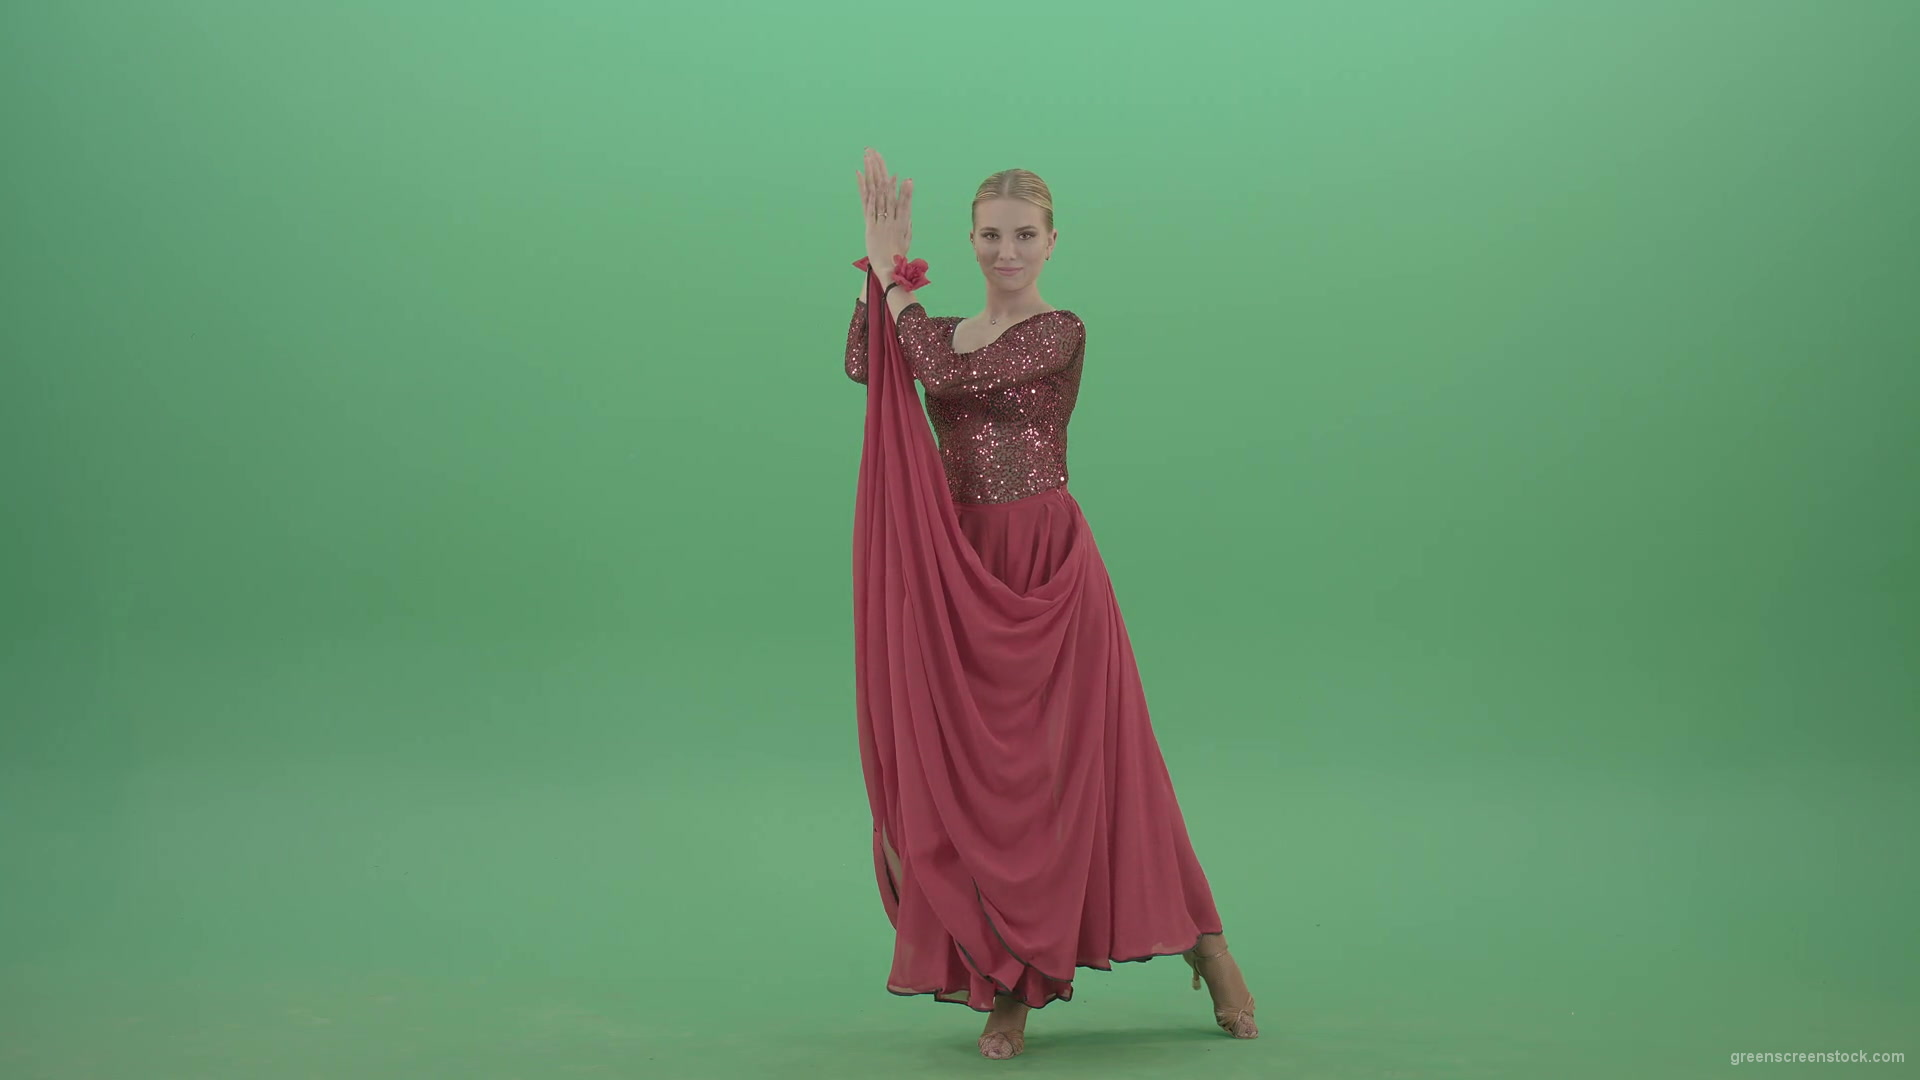 Elegant-woman-in-red-ballroom-dress-spinning-and-clapping-in-hands-isolated-on-green-screen-4K-Video-Footage-1920_009 Green Screen Stock